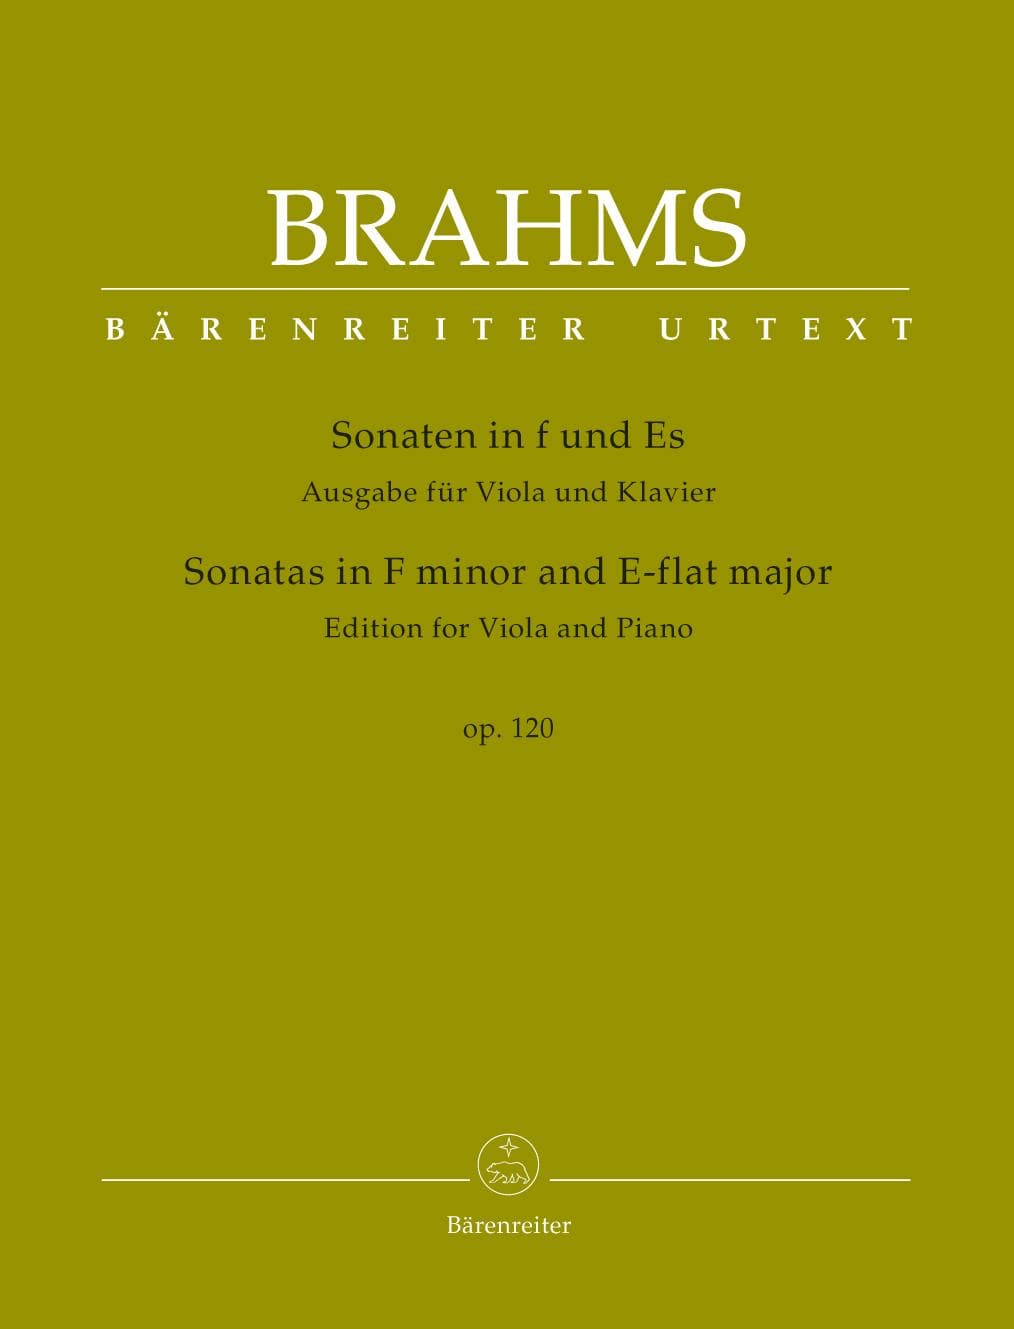 Brahms, Johannes - Sonatas in F Minor and E-flat Major, Op 120 - for Viola and Piano - edited by Clive Brown and Neal Peres Da Costa - Barenreiter URTEXT